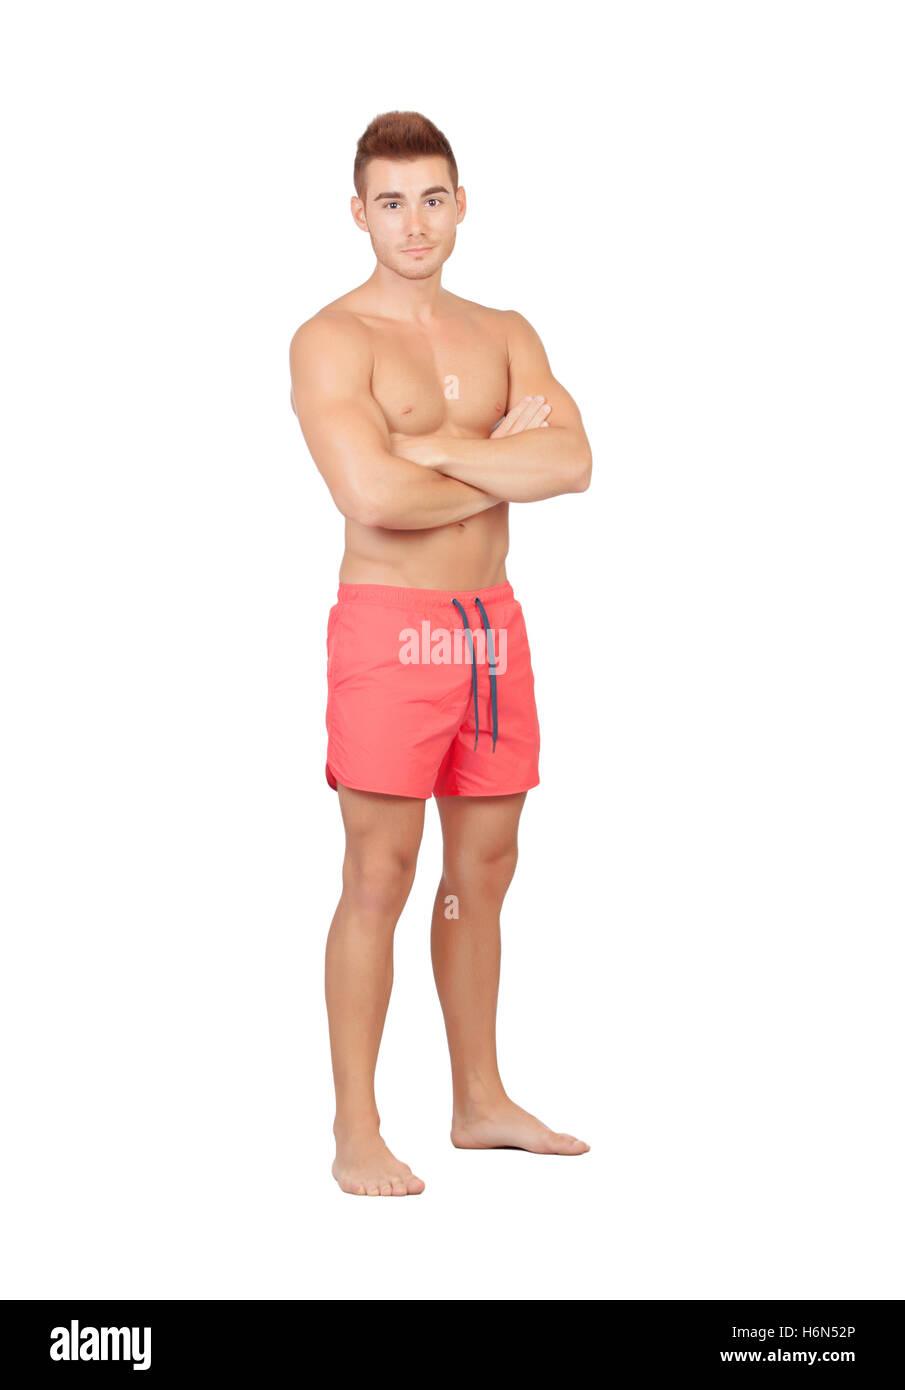 Handsome lifeguard with red swimsuit isolated on white background Stock Photo